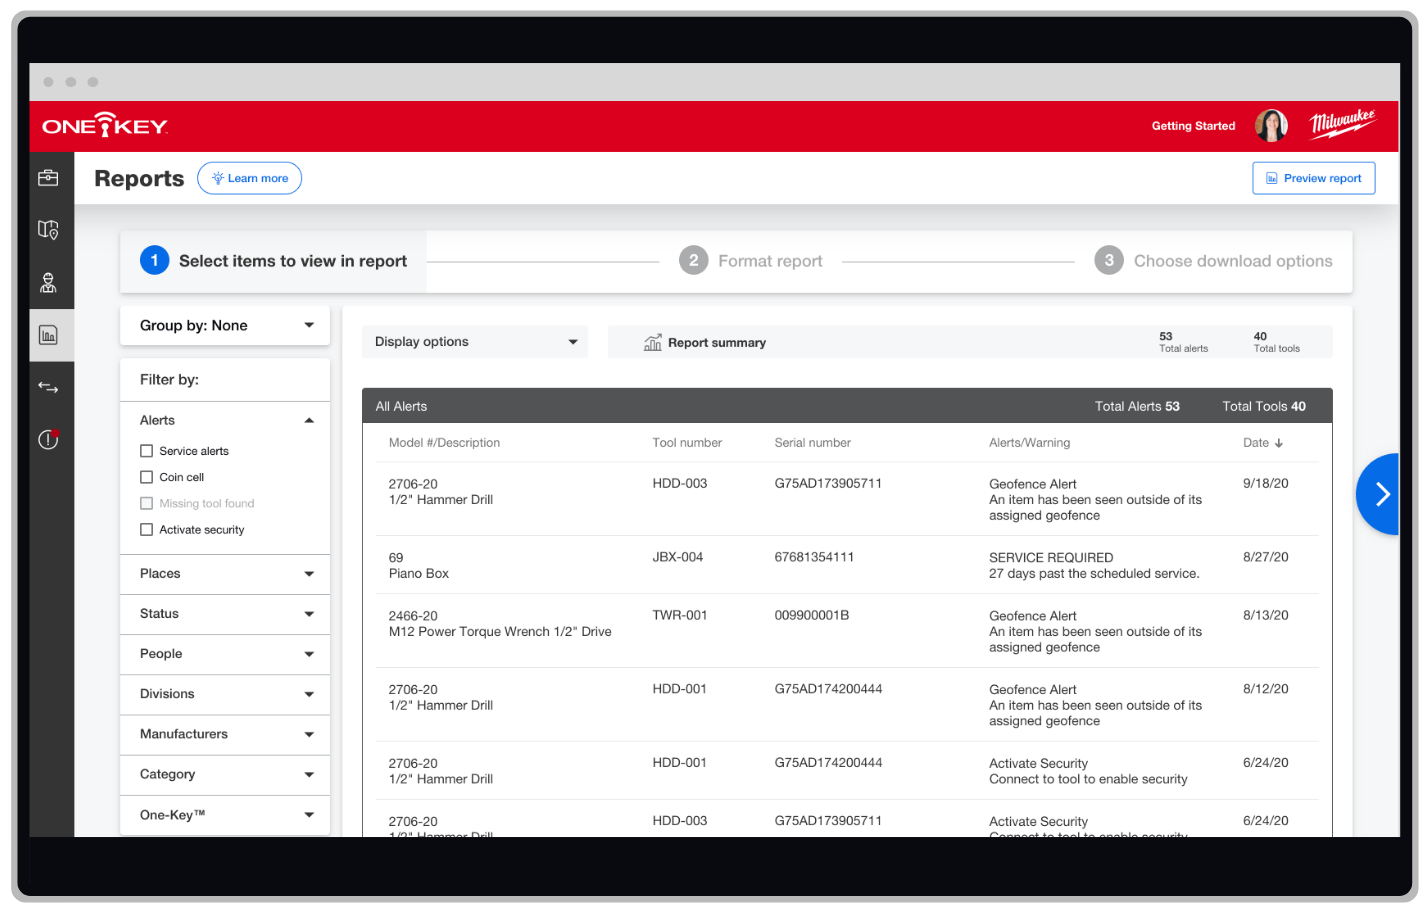 The One-Key enterprise inventory management app generates detailed alerts reports